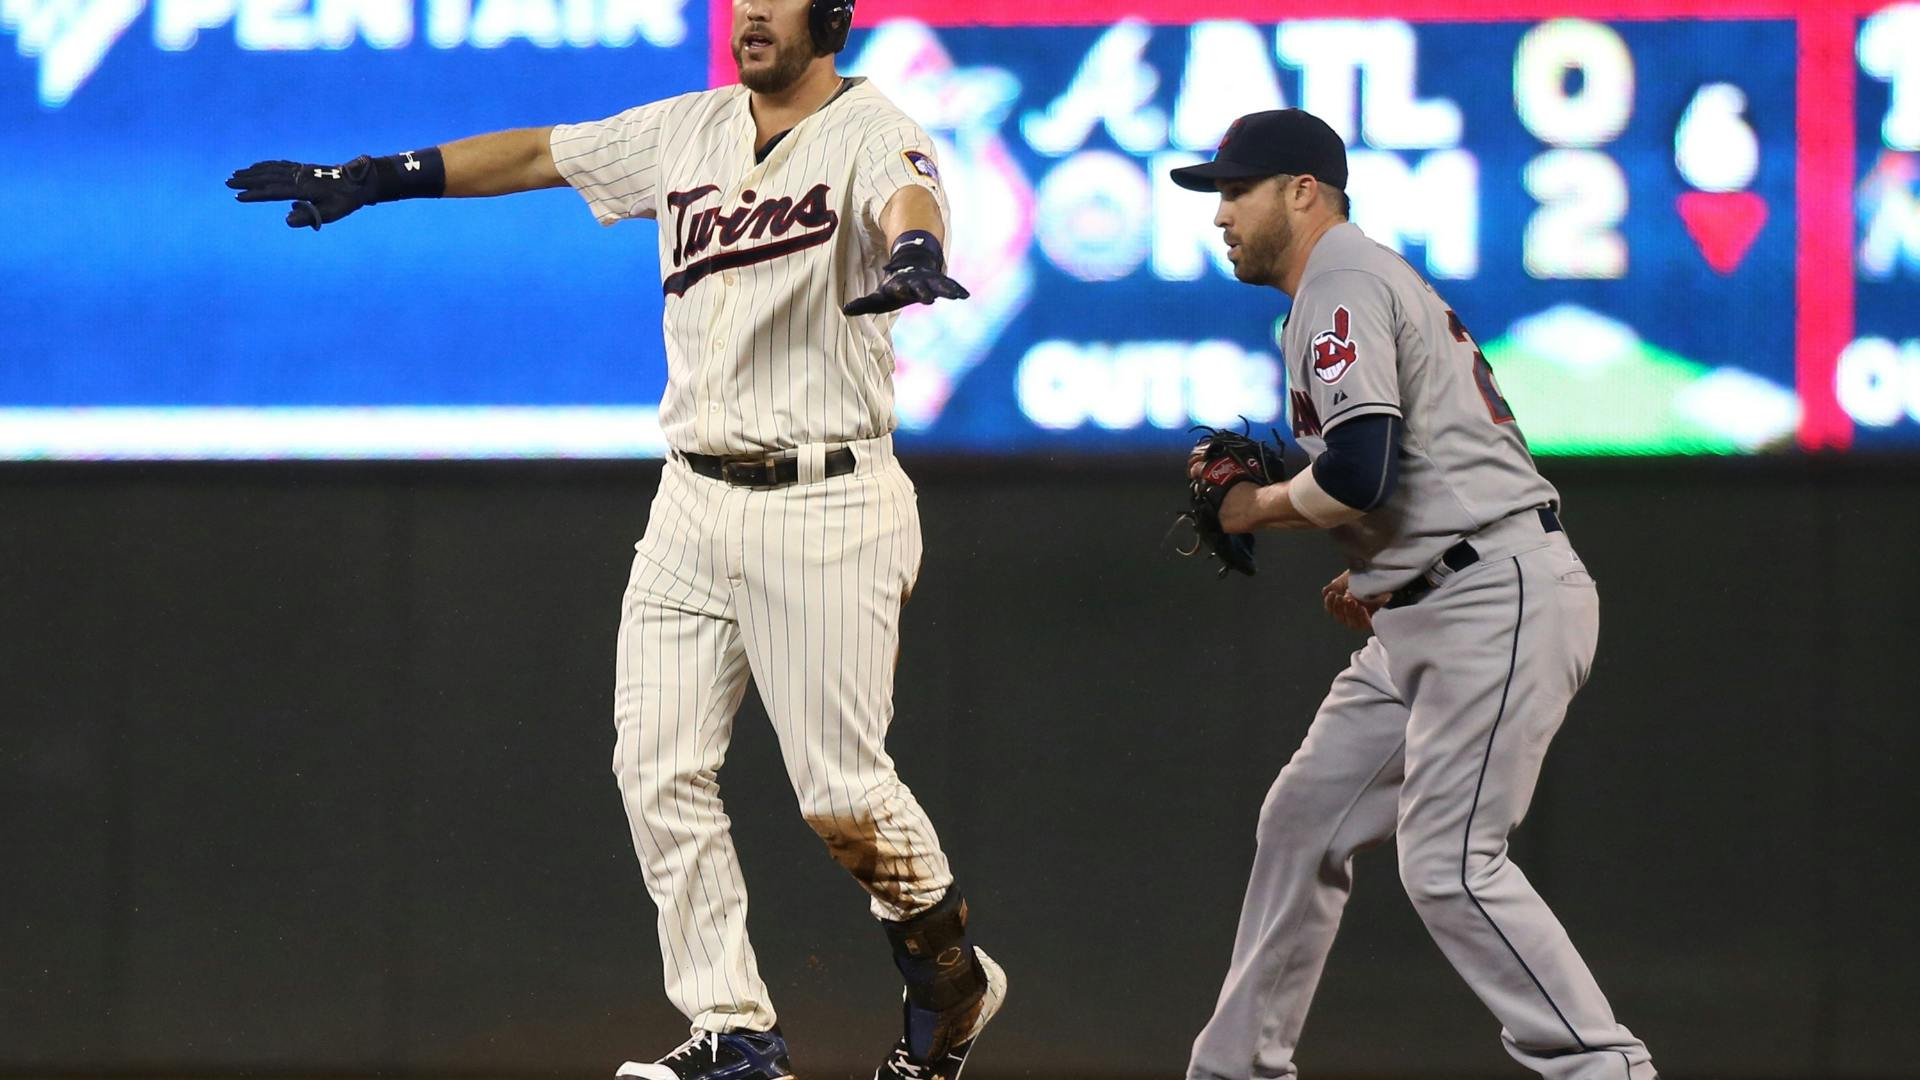 Trevor Plouffe had three hits to lead the Twins offense during victory over Cleveland